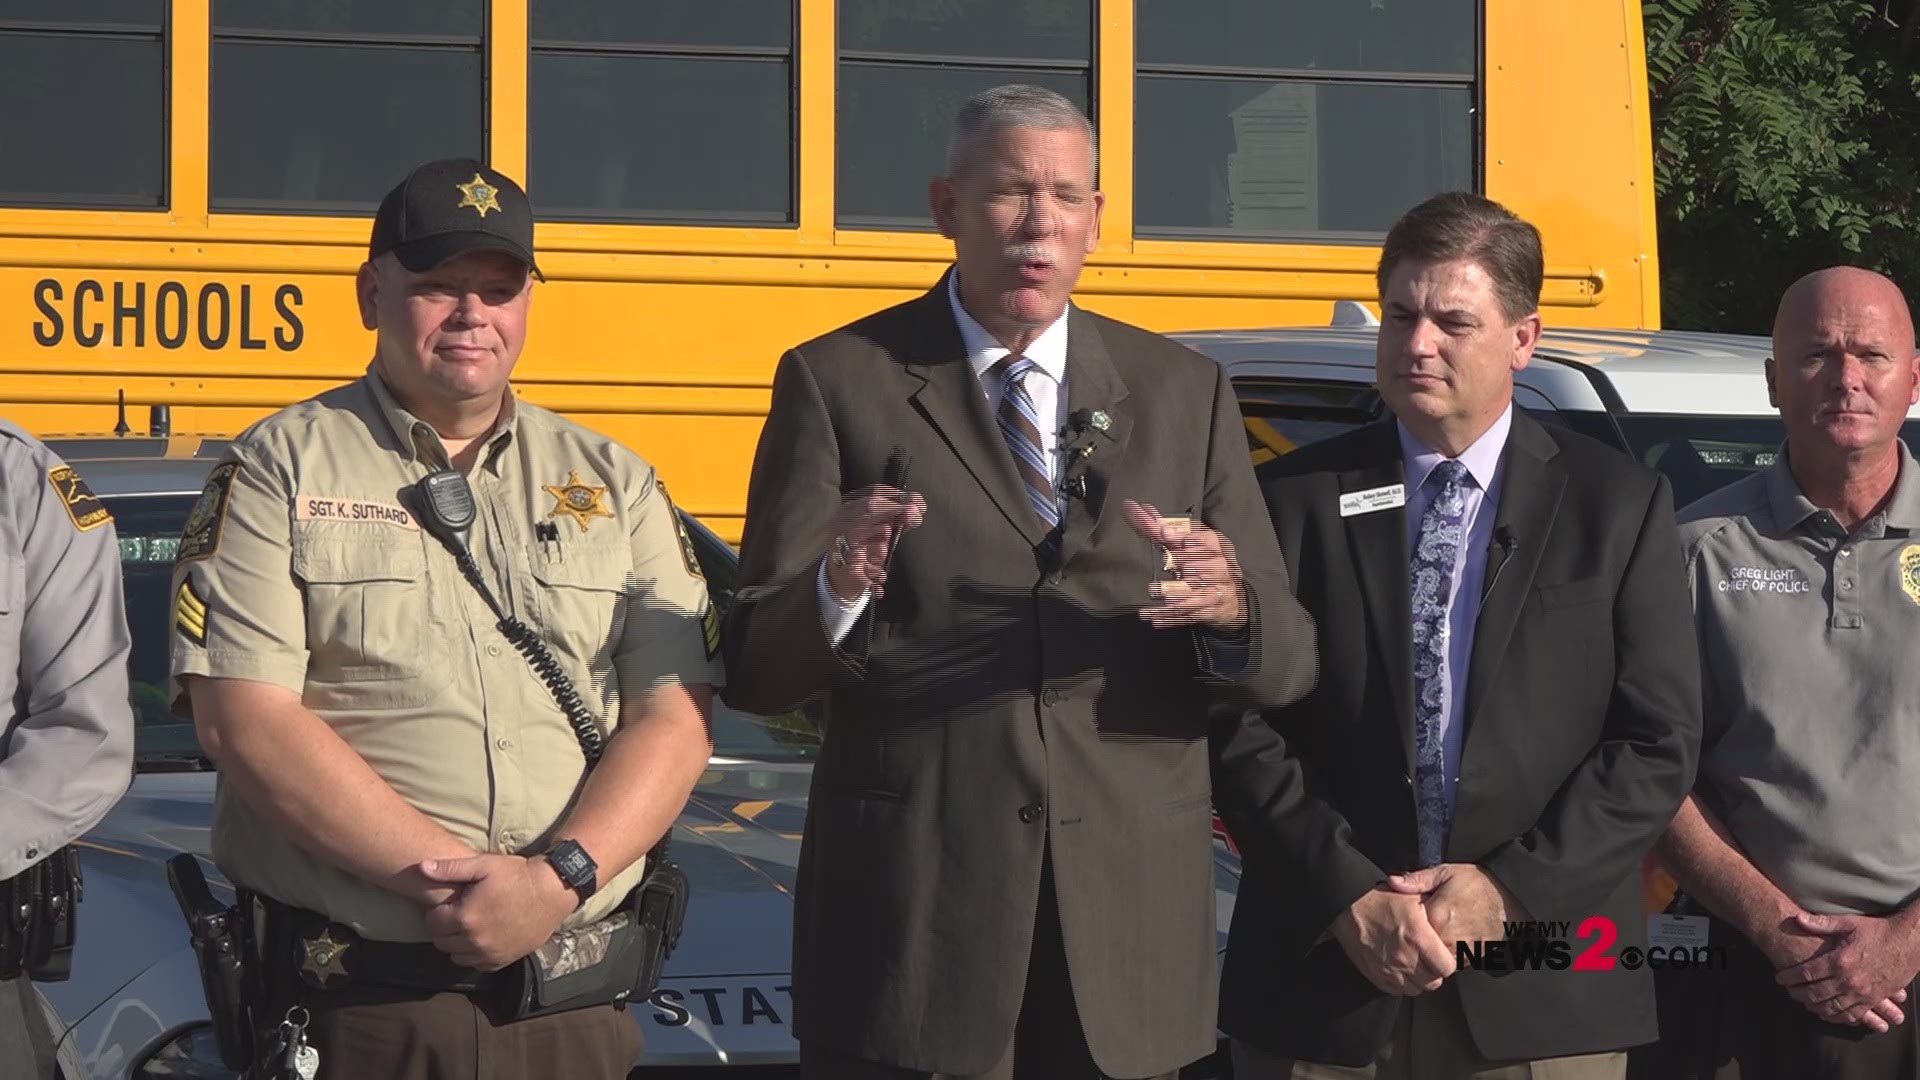 Rockingham County Sheriff's Office and Rockingham County Schools team up to talk school bus safety. What they have to say is vital to keeping kids school this school year.